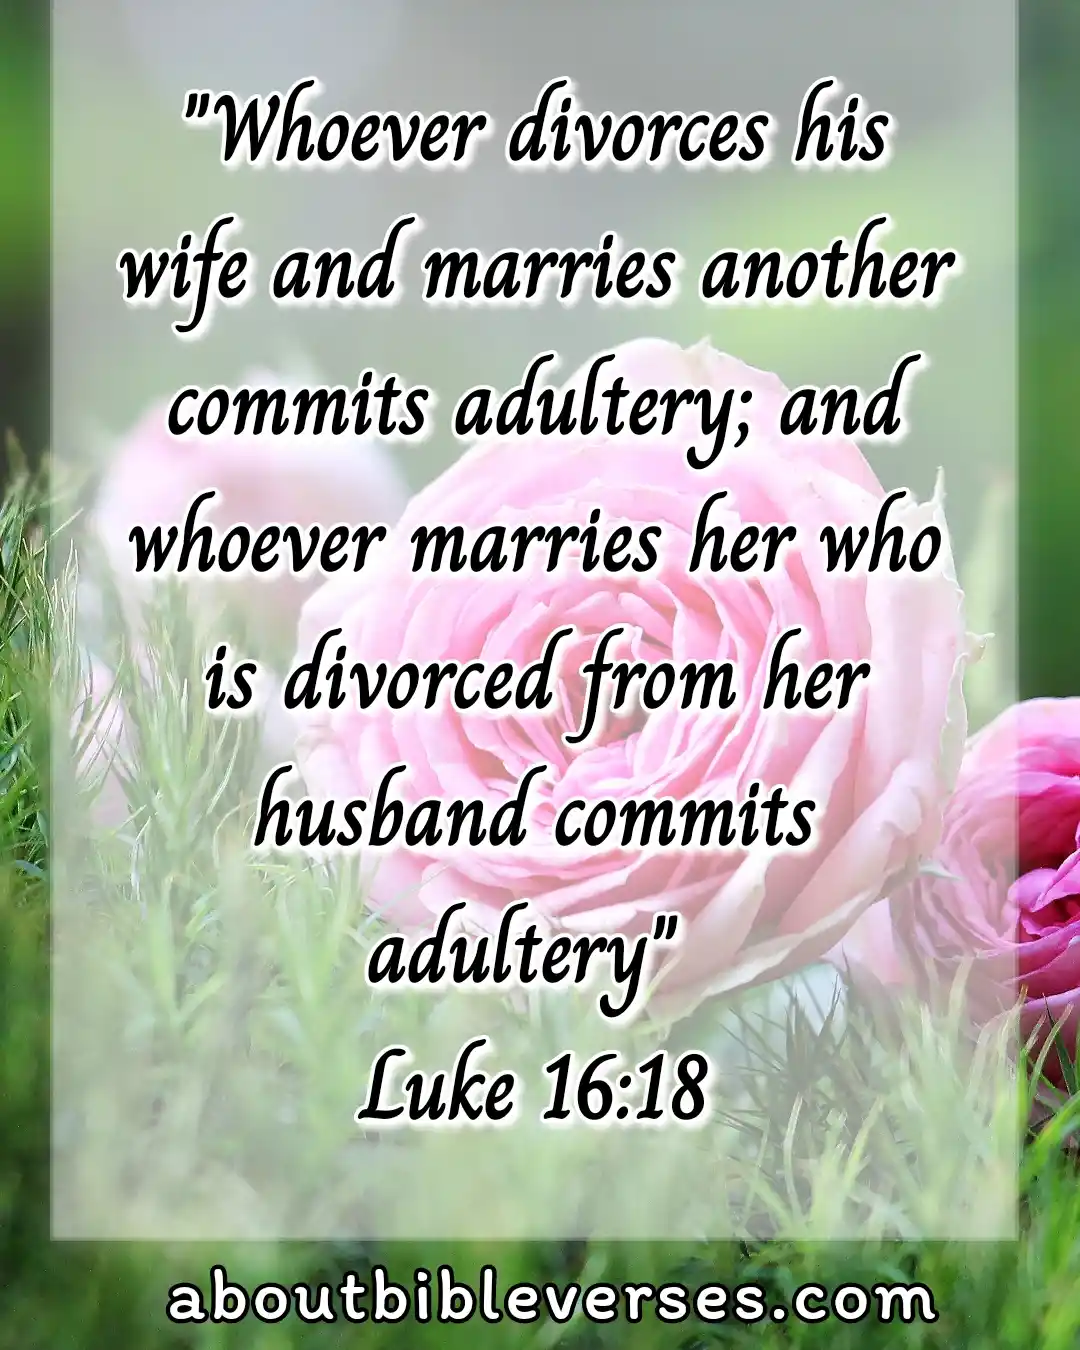 Bible Verses About A Healthy Marriage (Luke 16:18)